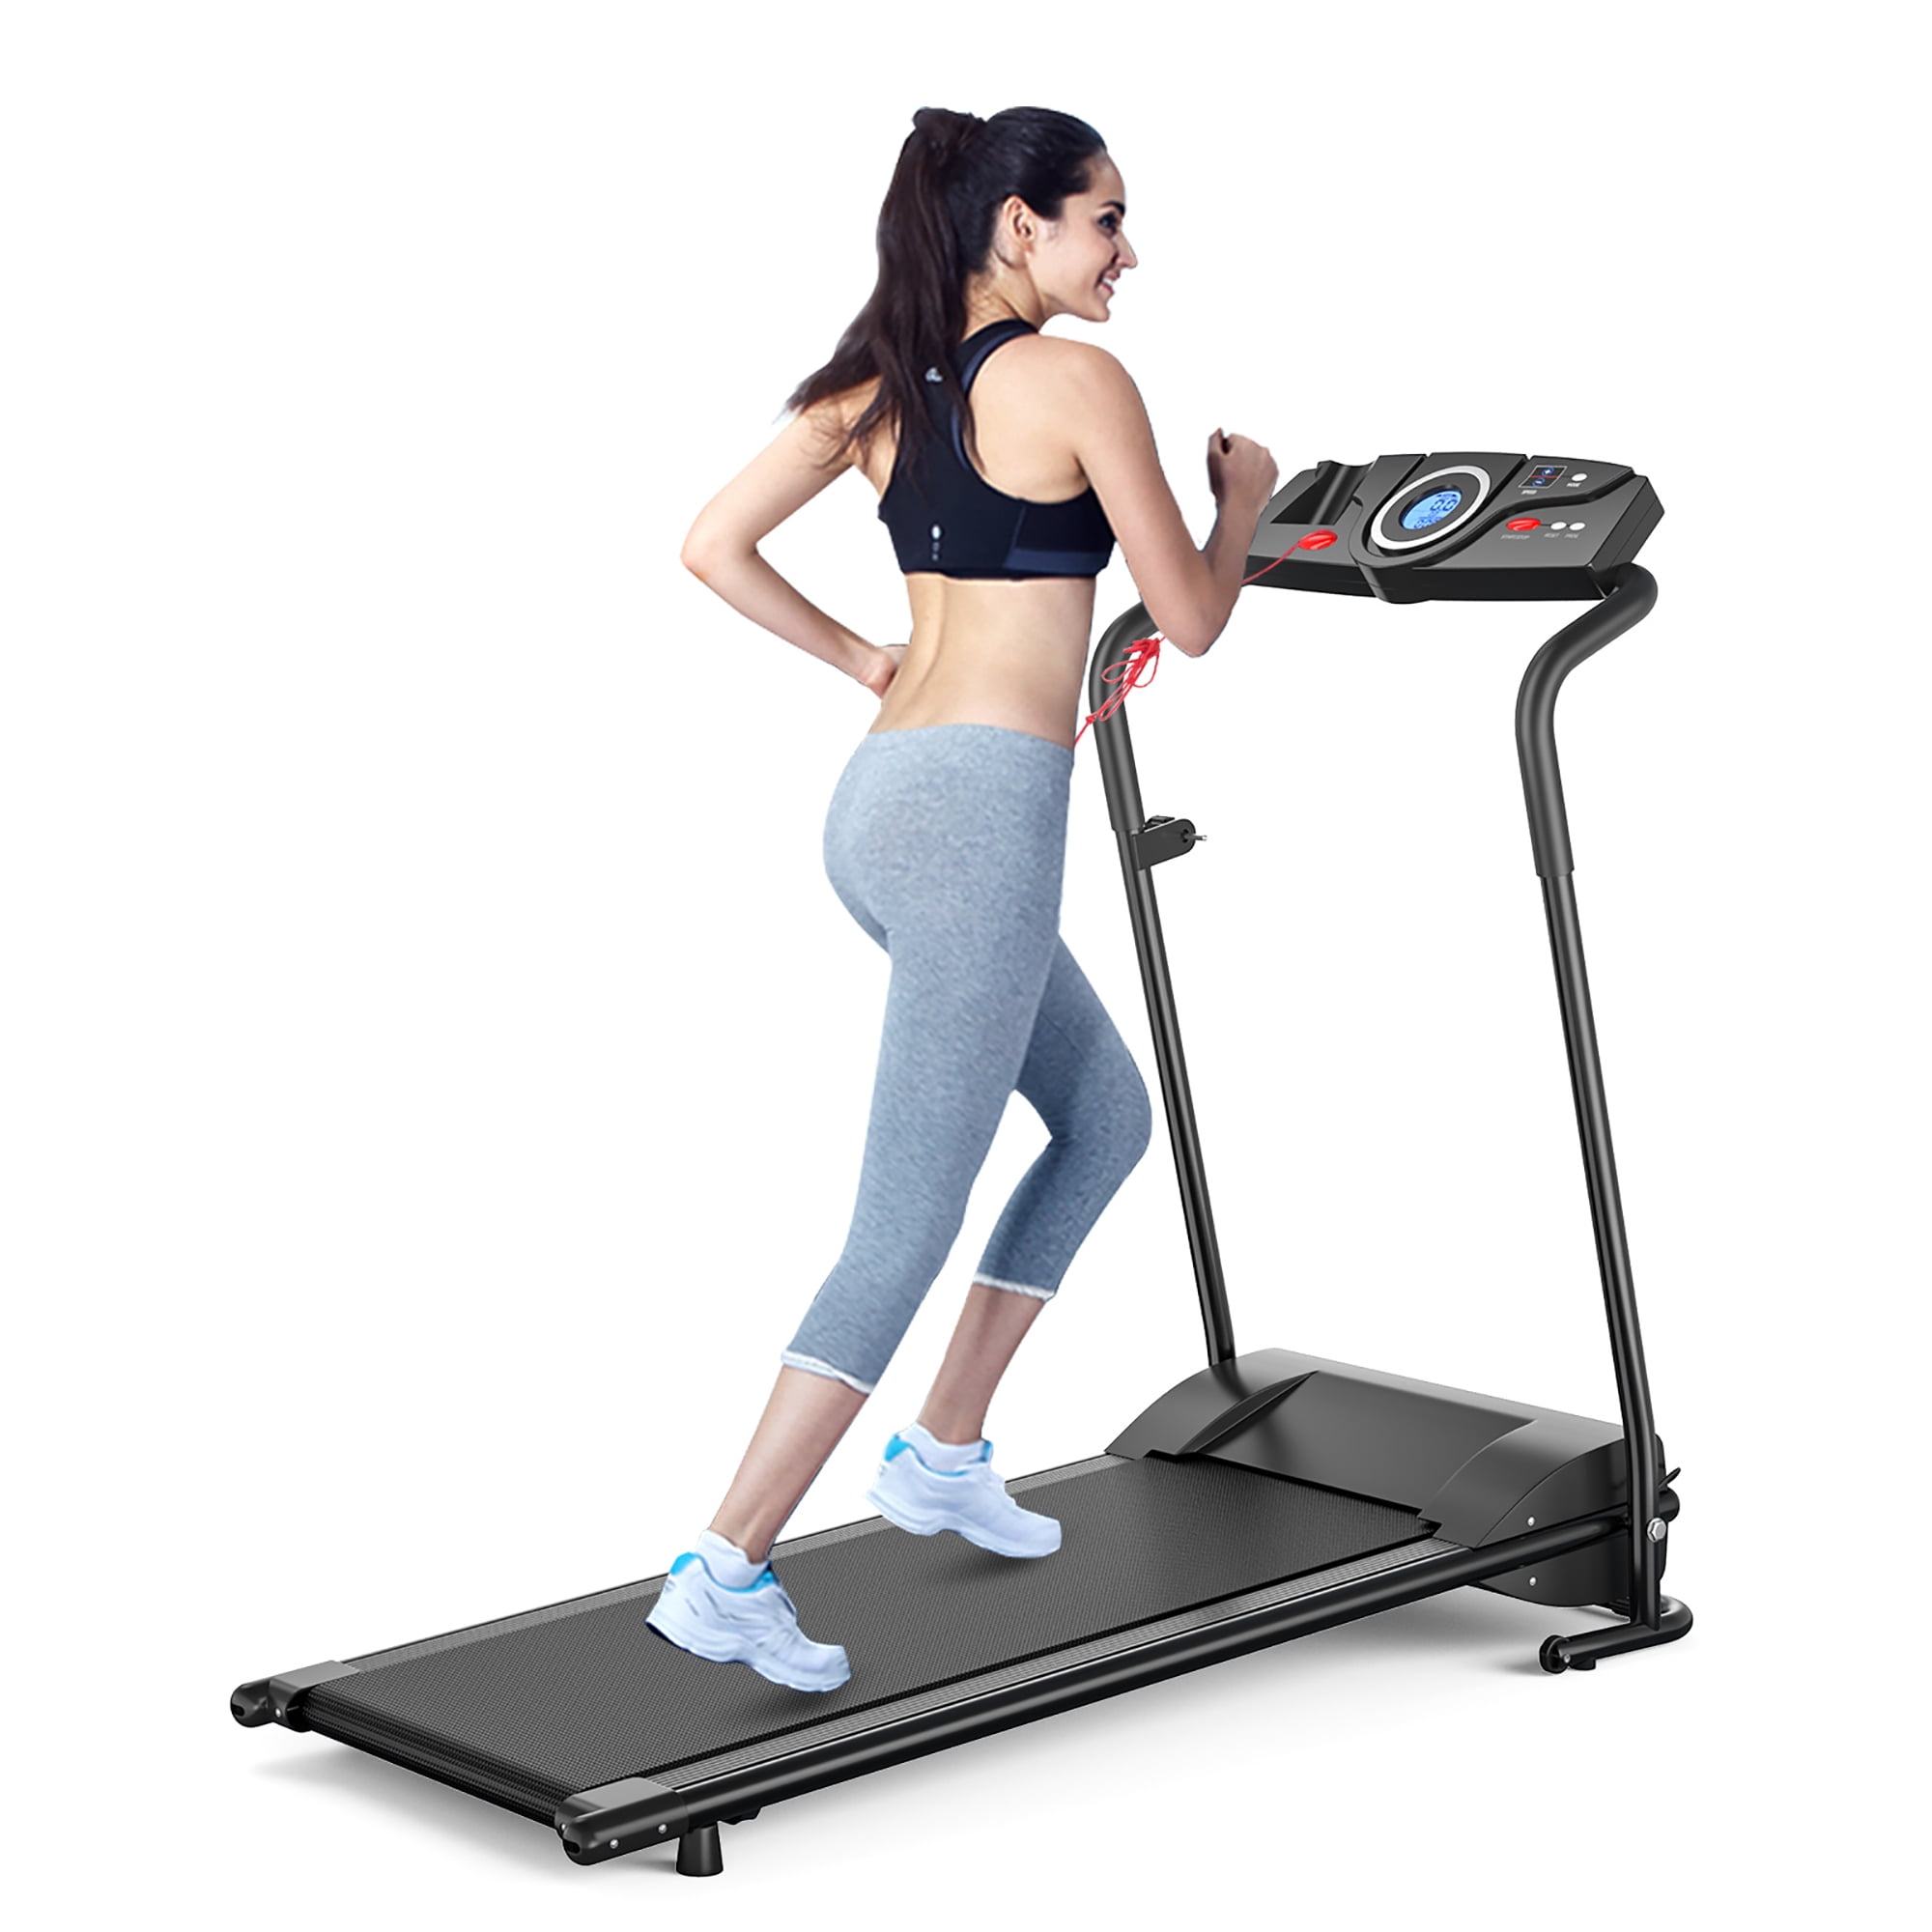 Gym Treadmill Running Machine Fitness Equipment Cover Protector Sports venues 